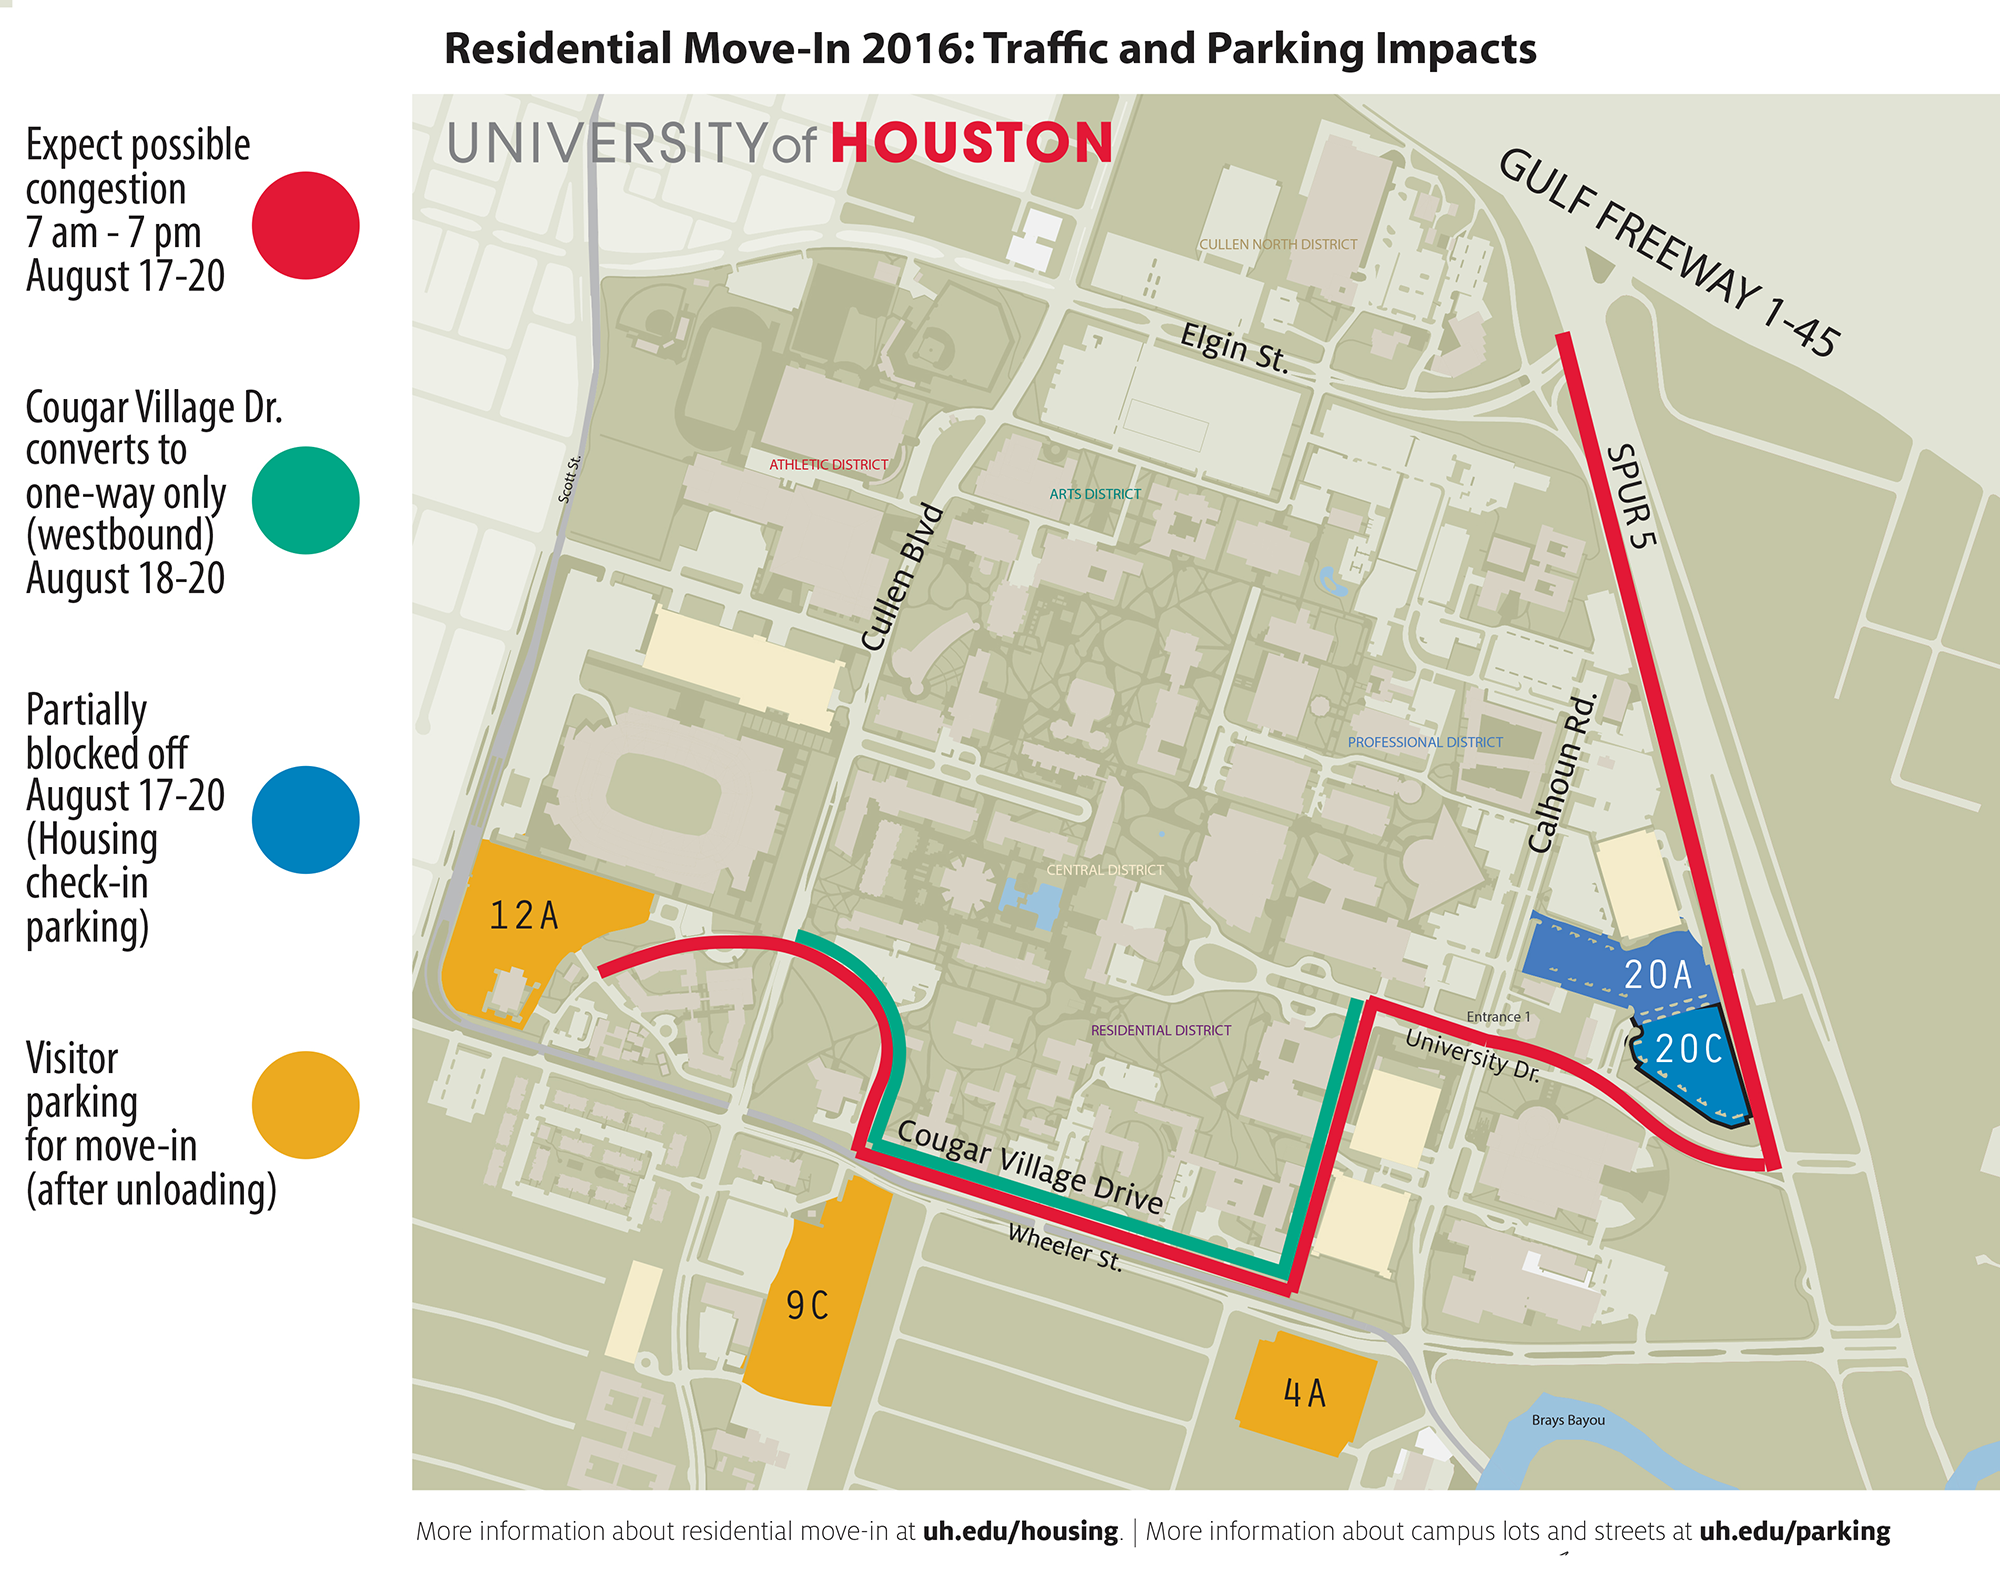 Residential move-in may impact traffic and parking on campus